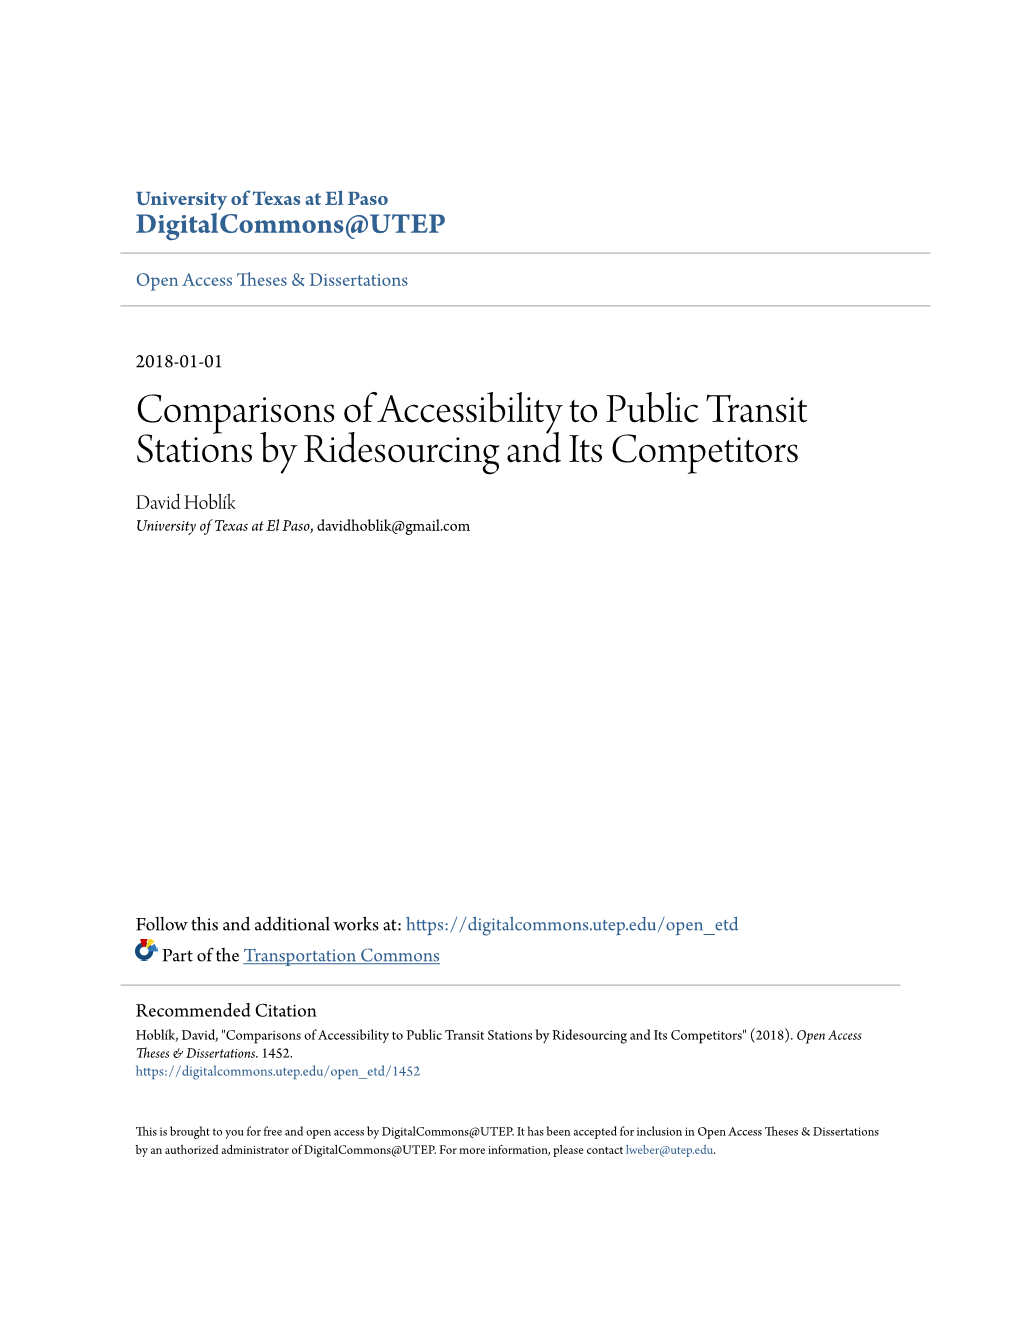 Comparisons of Accessibility to Public Transit Stations by Ridesourcing and Its Competitors David Hoblík University of Texas at El Paso, Davidhoblik@Gmail.Com